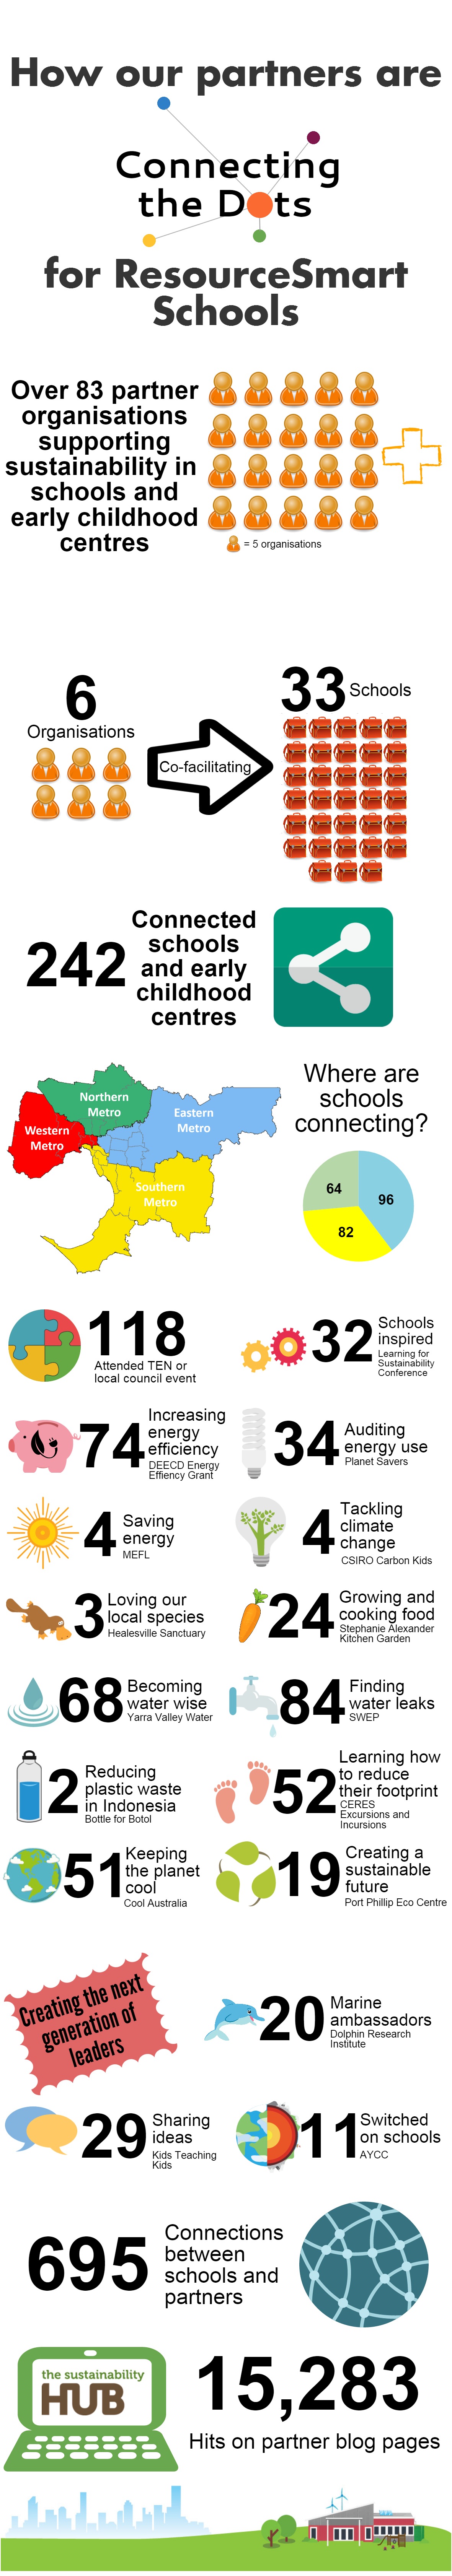 Connecting the Dots infographic